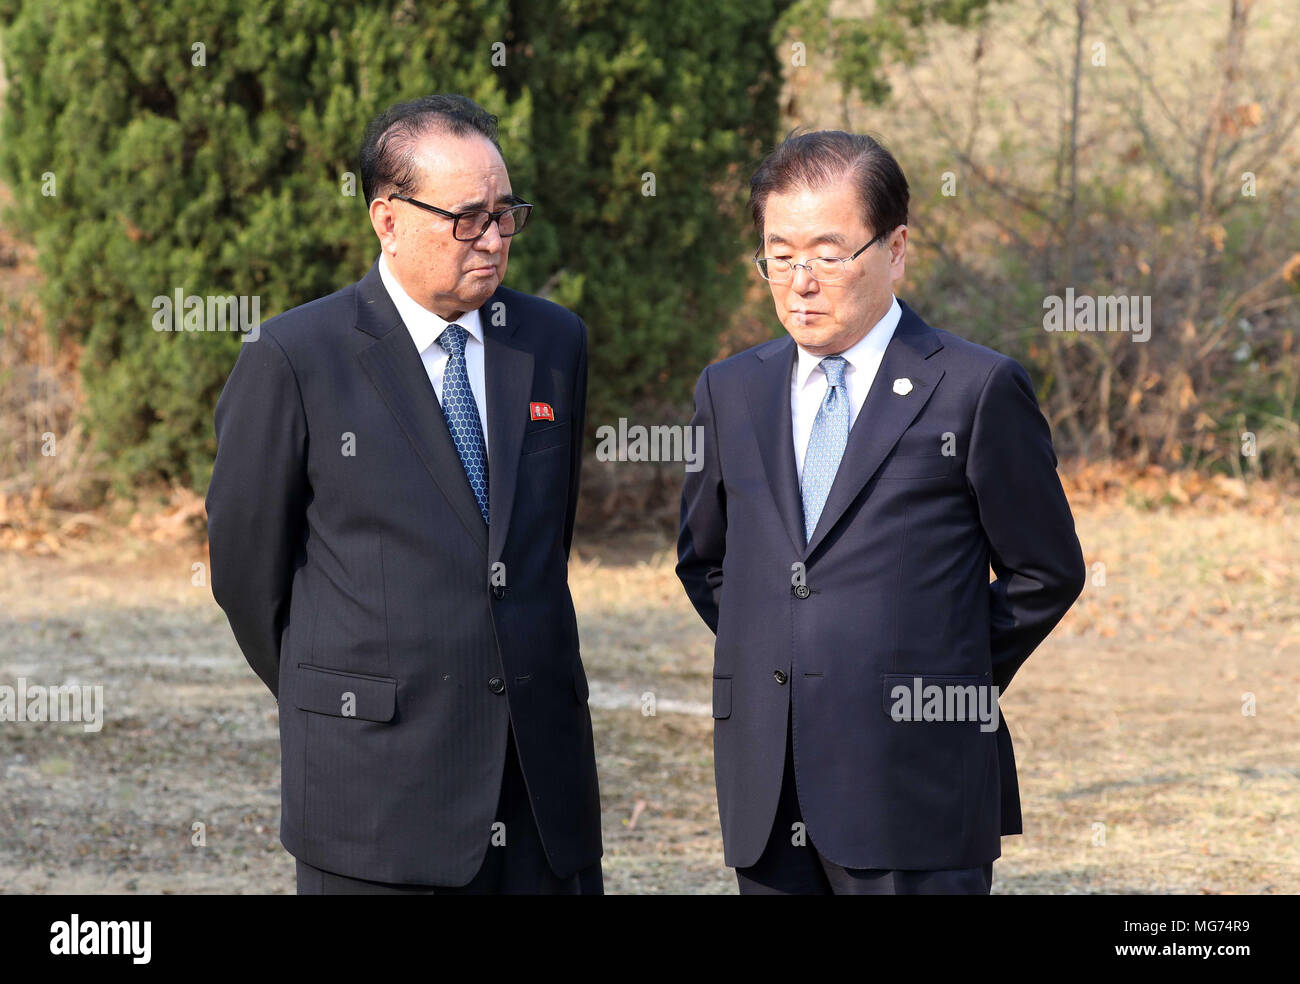 Seoul, South Korea, 27 April 2018. Chung Eui-Yong and Ri Su-Yong, Apr 27, 2018 : South Korea's national security advisor Chung Eui-Yong (R) and North Korea's vice party chairman on international affairs Ri Su-Yong talk after South Korean President Moon Jae-In and North Korean leader Kim Jong-Un attended an event to plant a pine tree at the Panmunjom in the Demilitarized Zone (DMZ) separating the two Koreas in Paju, north of Seoul, South Korea. EDITORIAL USE ONLY Credit: Inter-Korean Summit Press Corps/Pool/AFLO/Alamy Live News Stock Photo